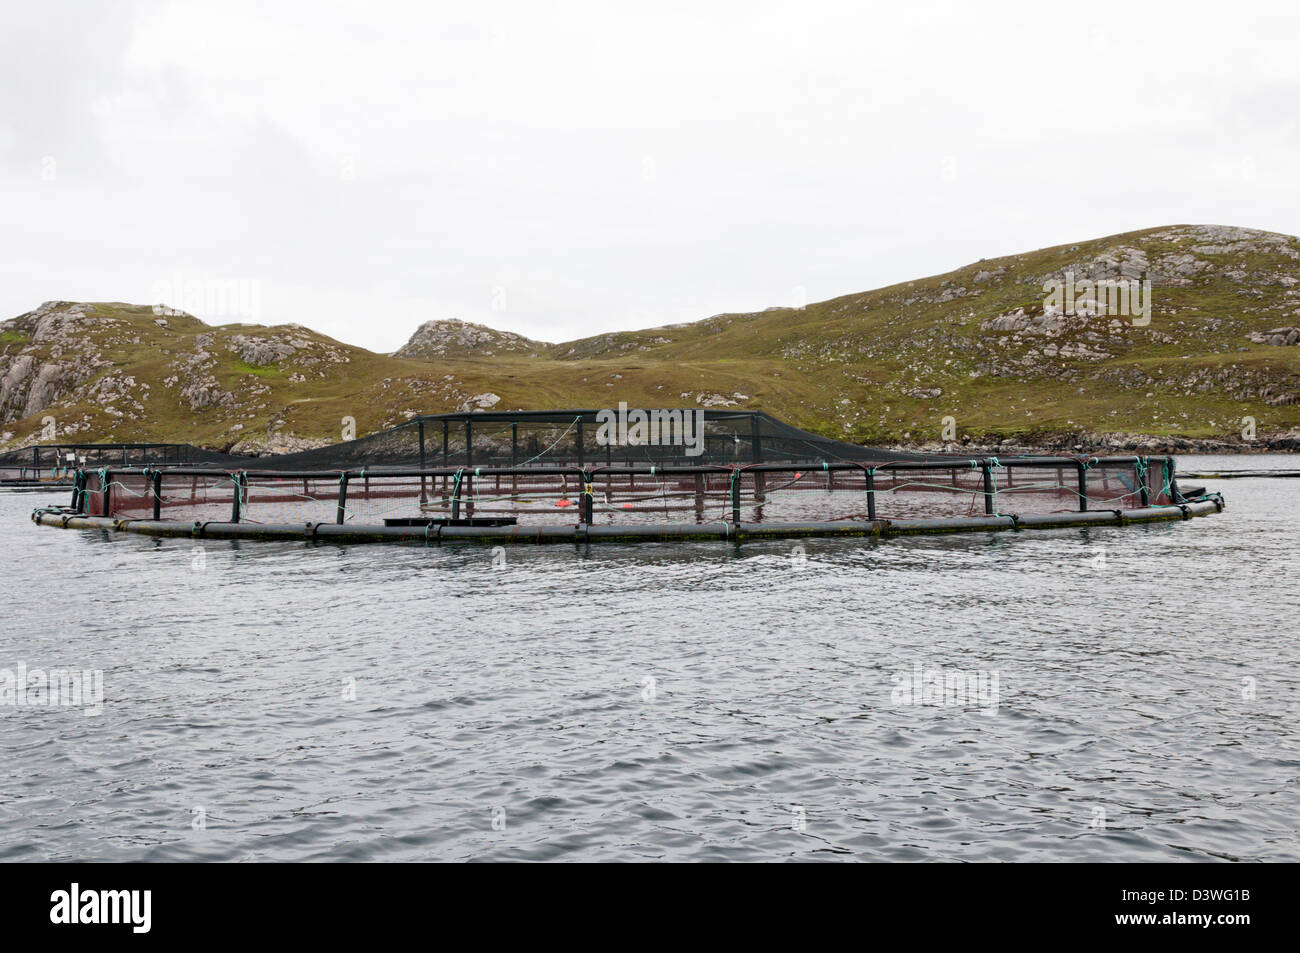 Netted fish farming cage in Loch Roag, Isle of Lewis in the Outer Hebrides. Stock Photo